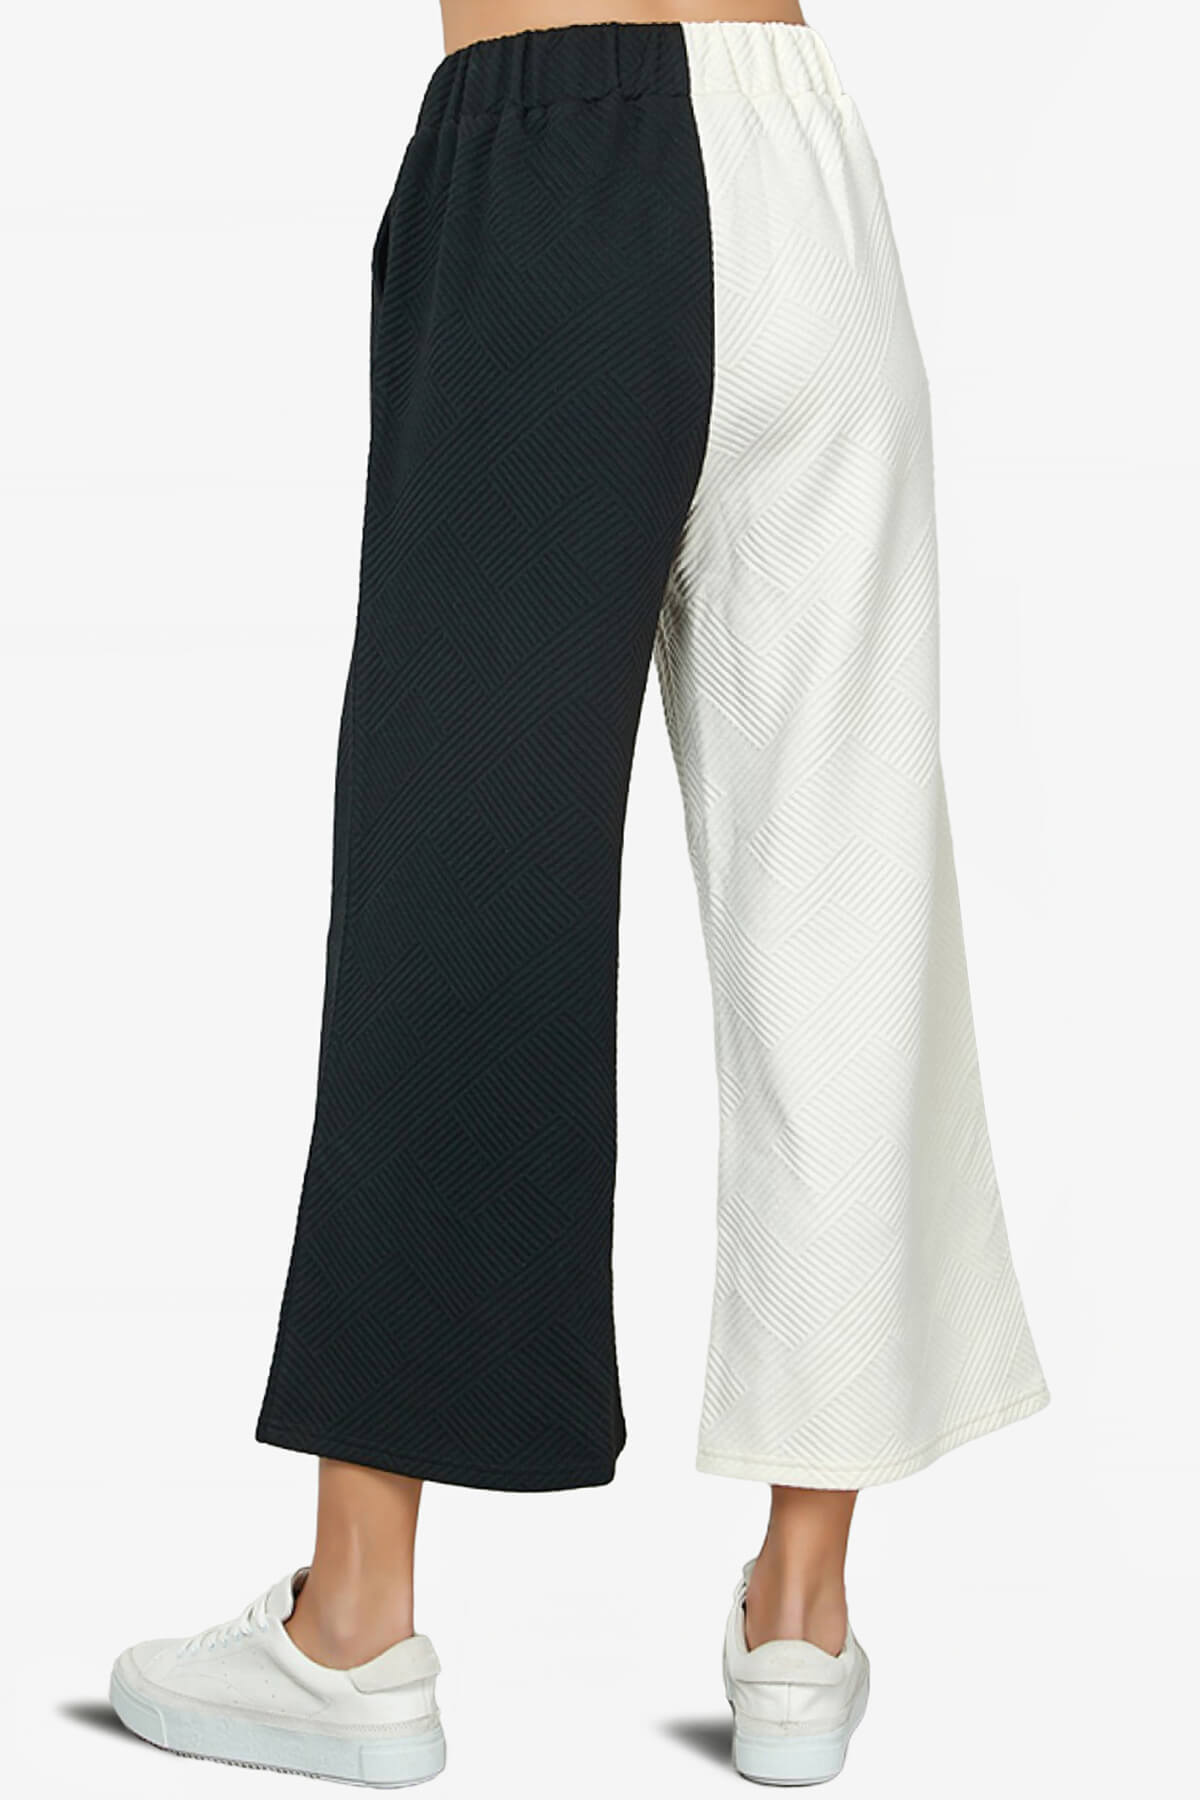 Lassy Textured Colorblock Lounge Culotte BLACK AND WHITE_2